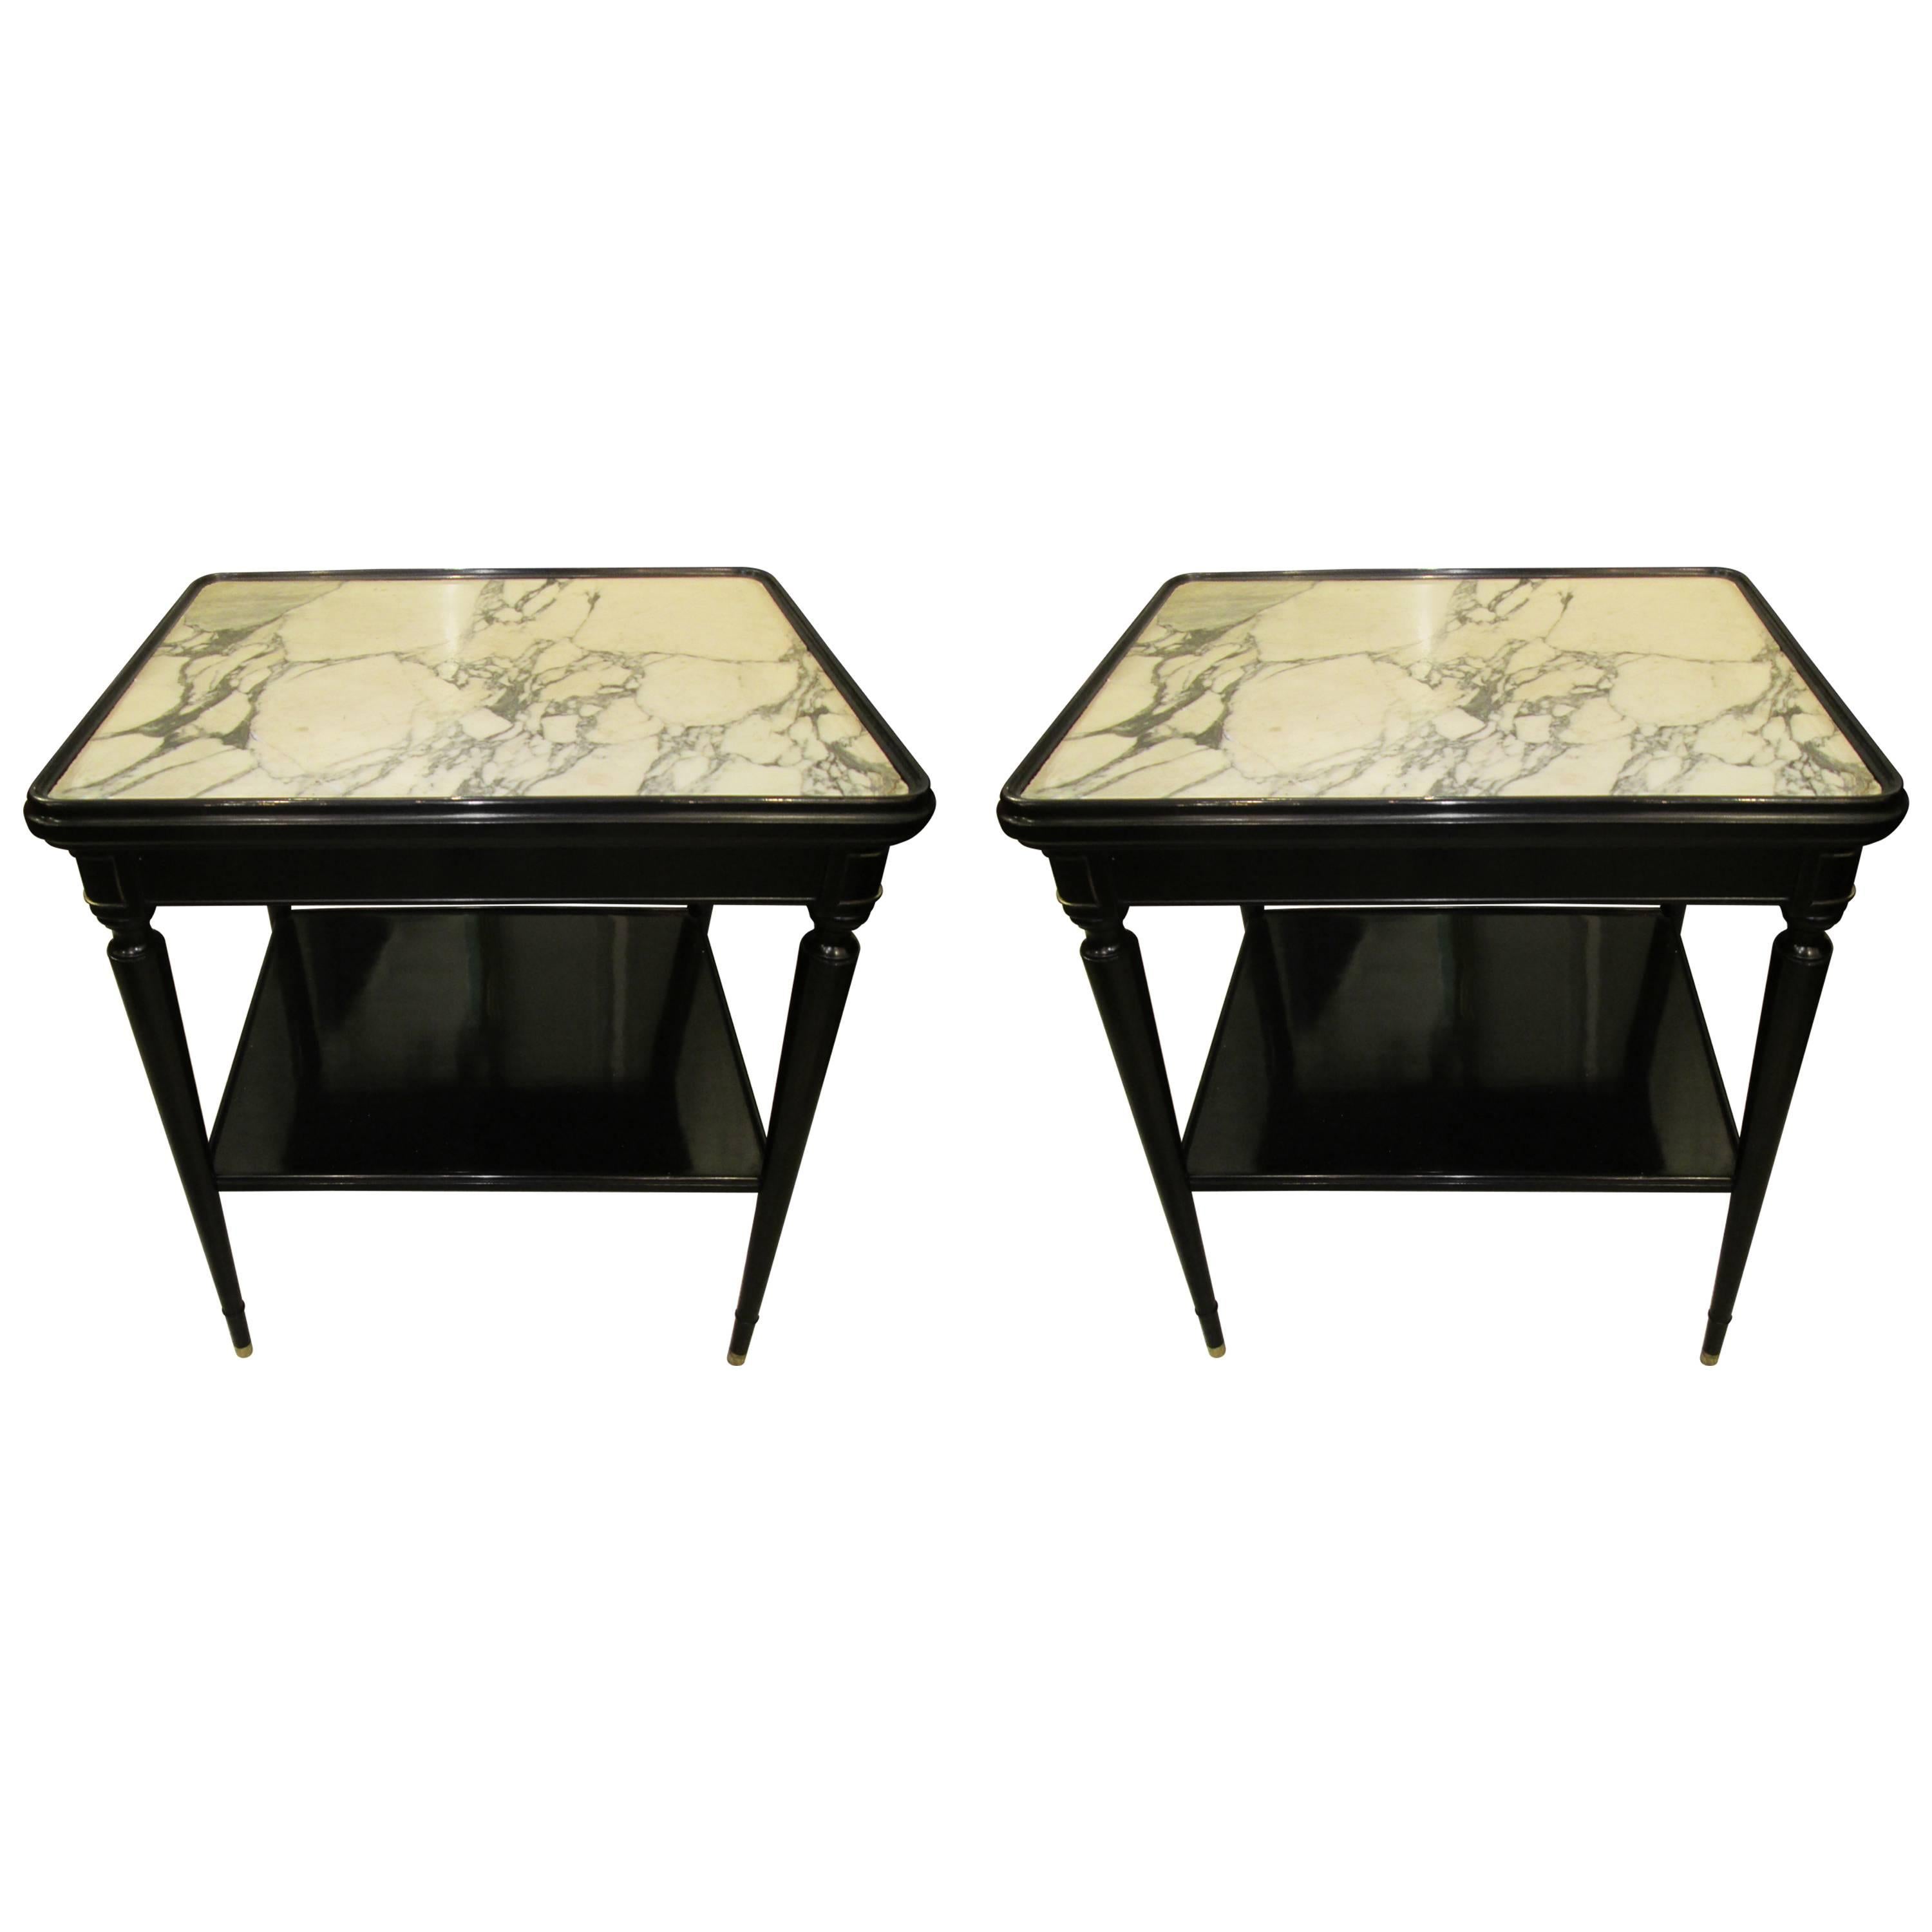 Pair of  French Ebonized Marble-Top Nightstands with Shelves